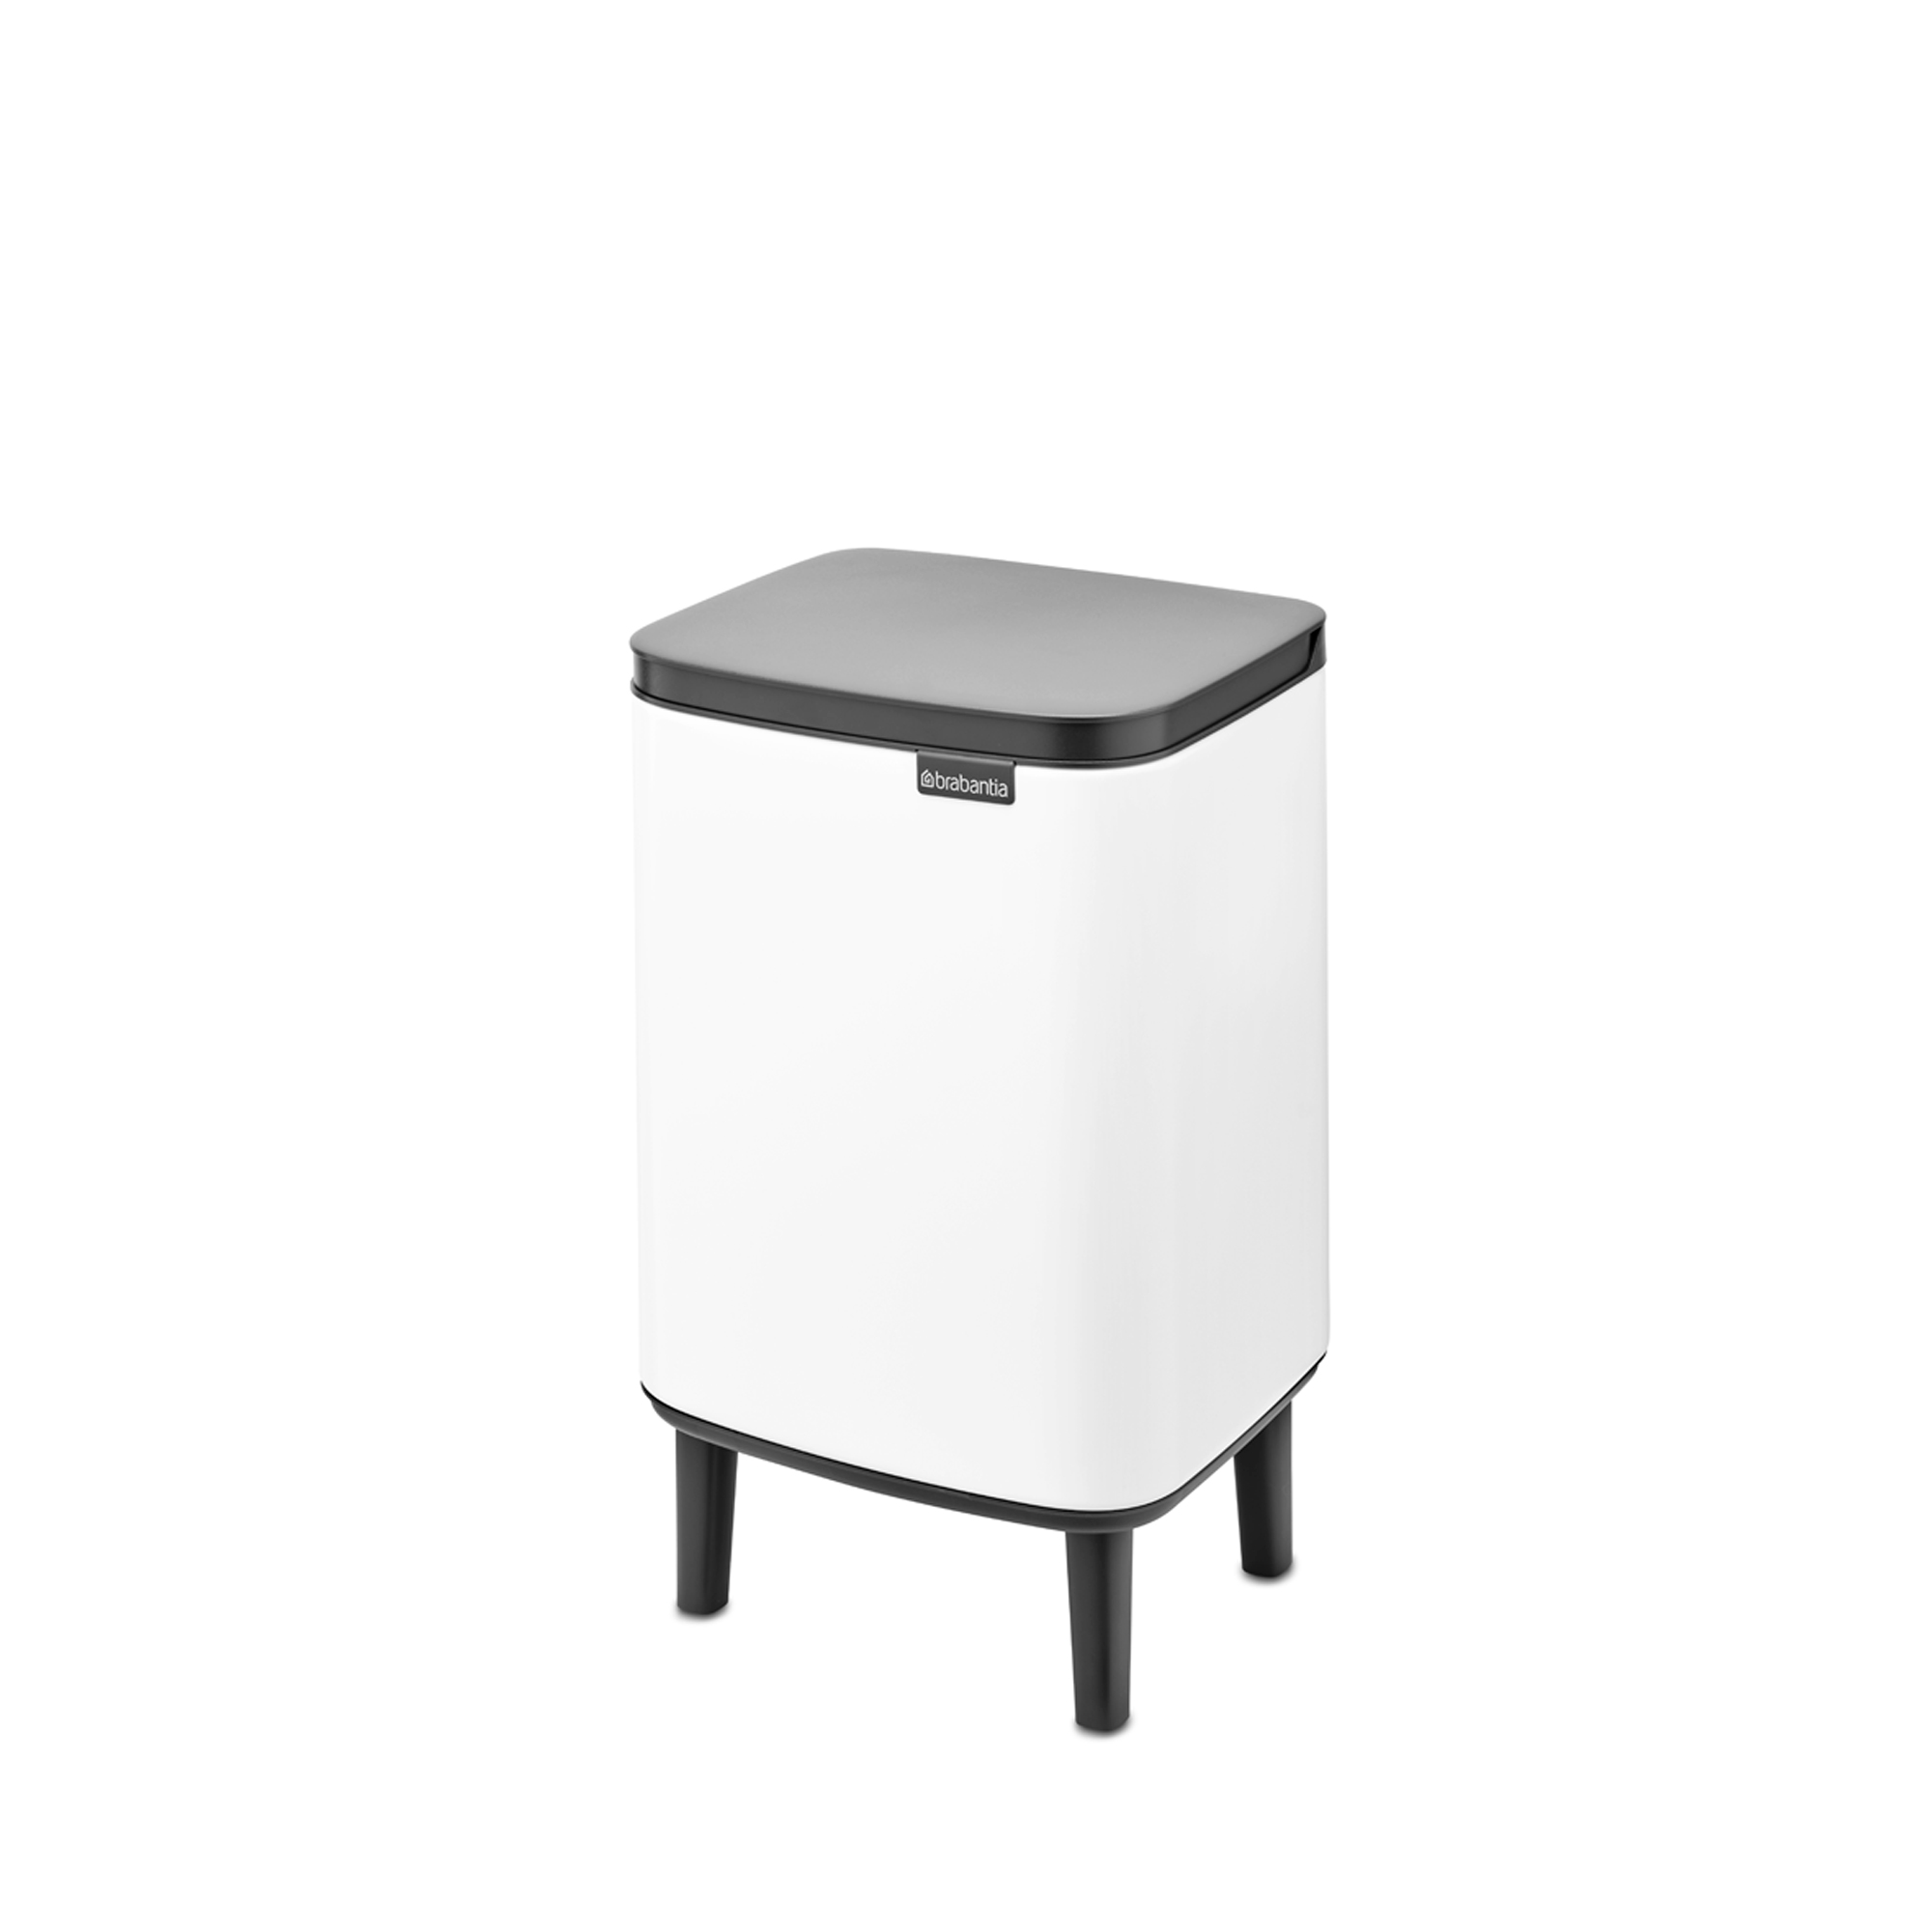 https://www.containerstore.com/catalogimages/491959/21483.jpg